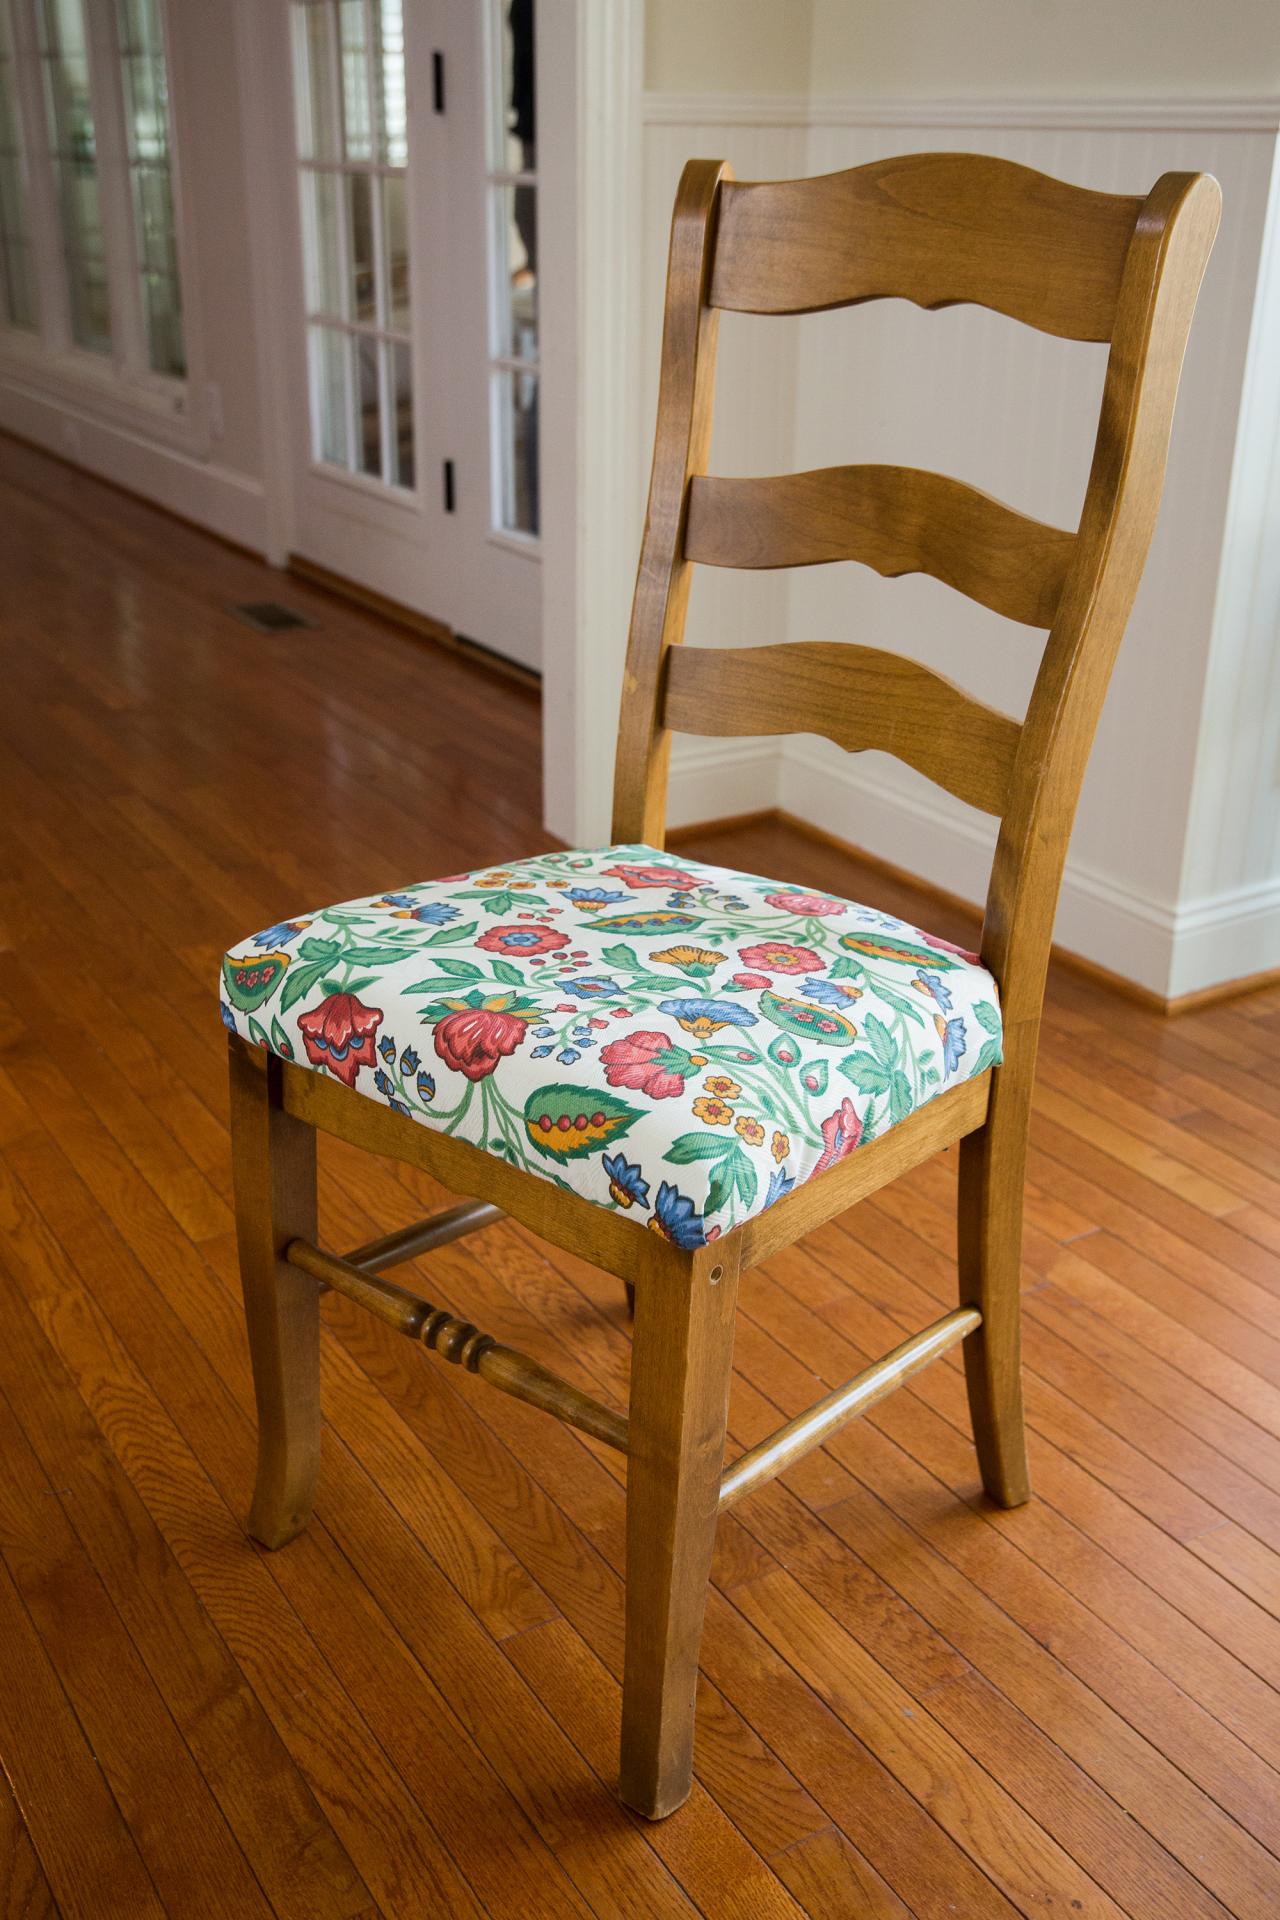 How To Re Cover A Dining Room Chair, Leather To Reupholster Dining Chairs